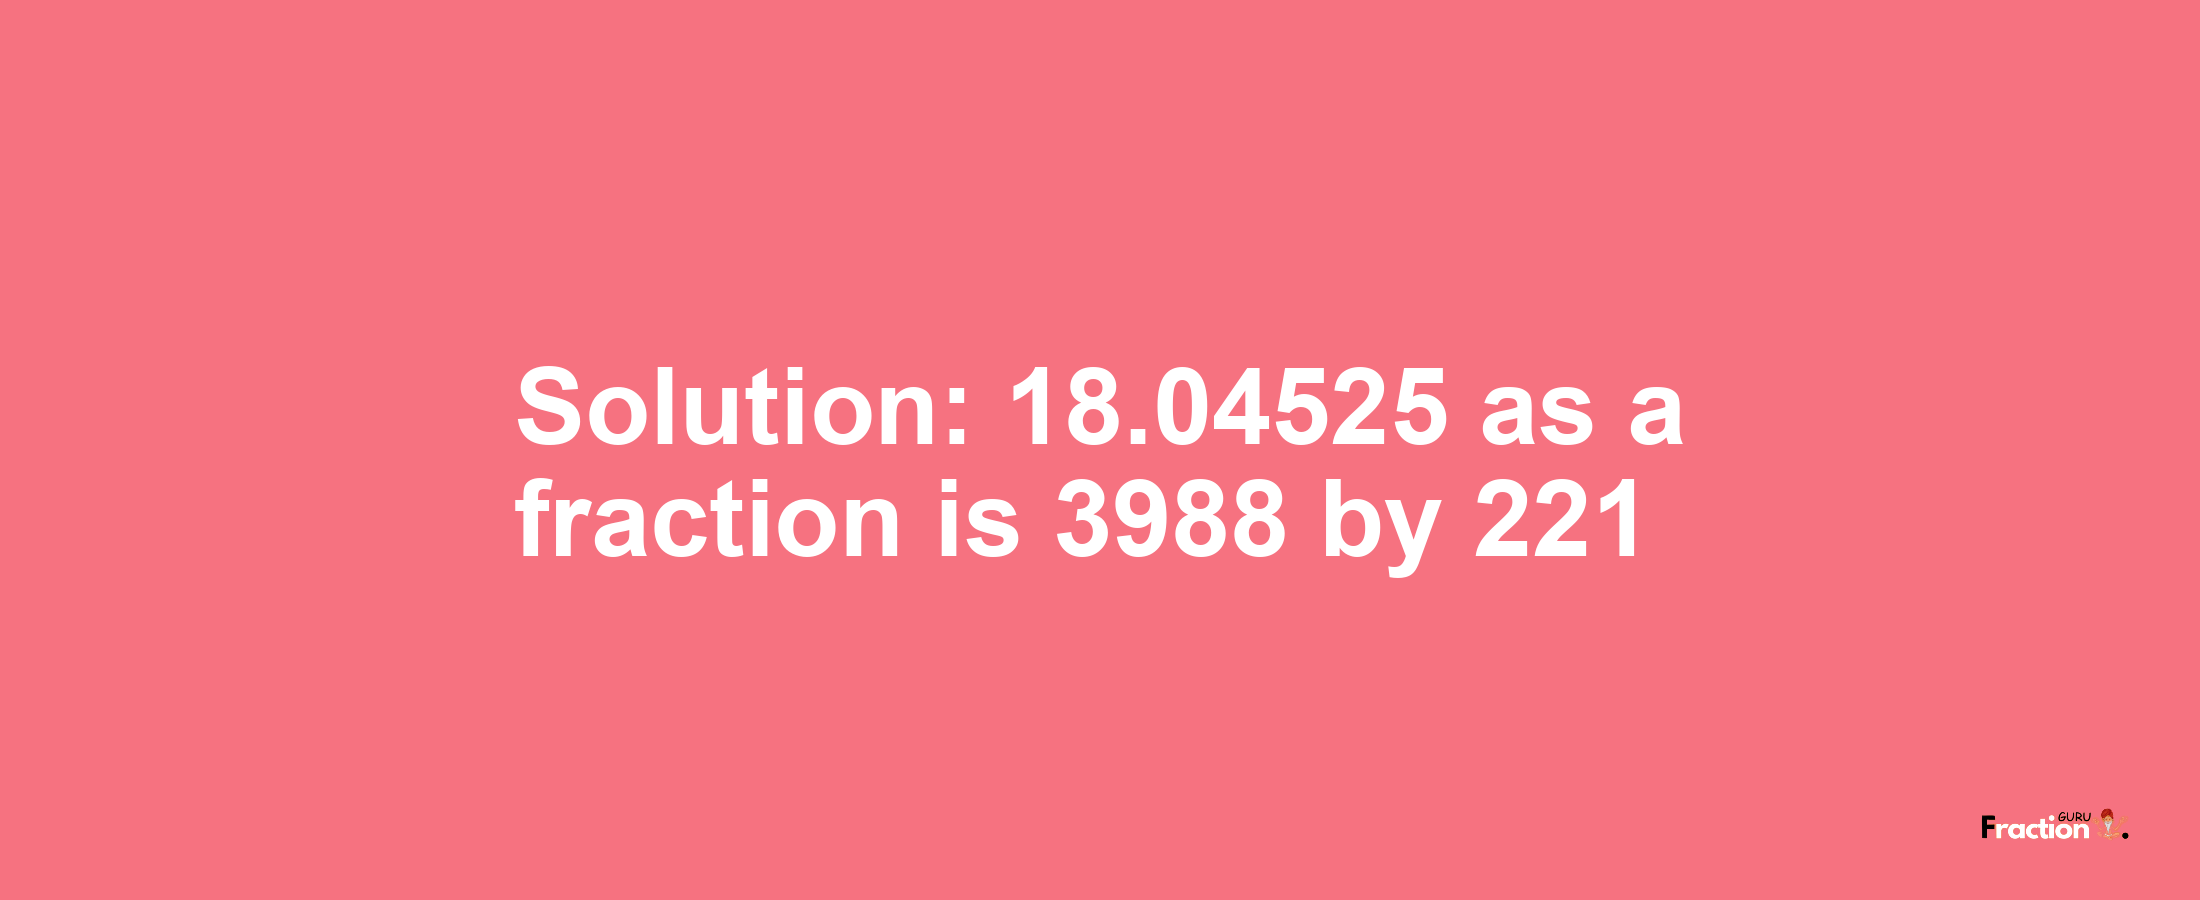 Solution:18.04525 as a fraction is 3988/221